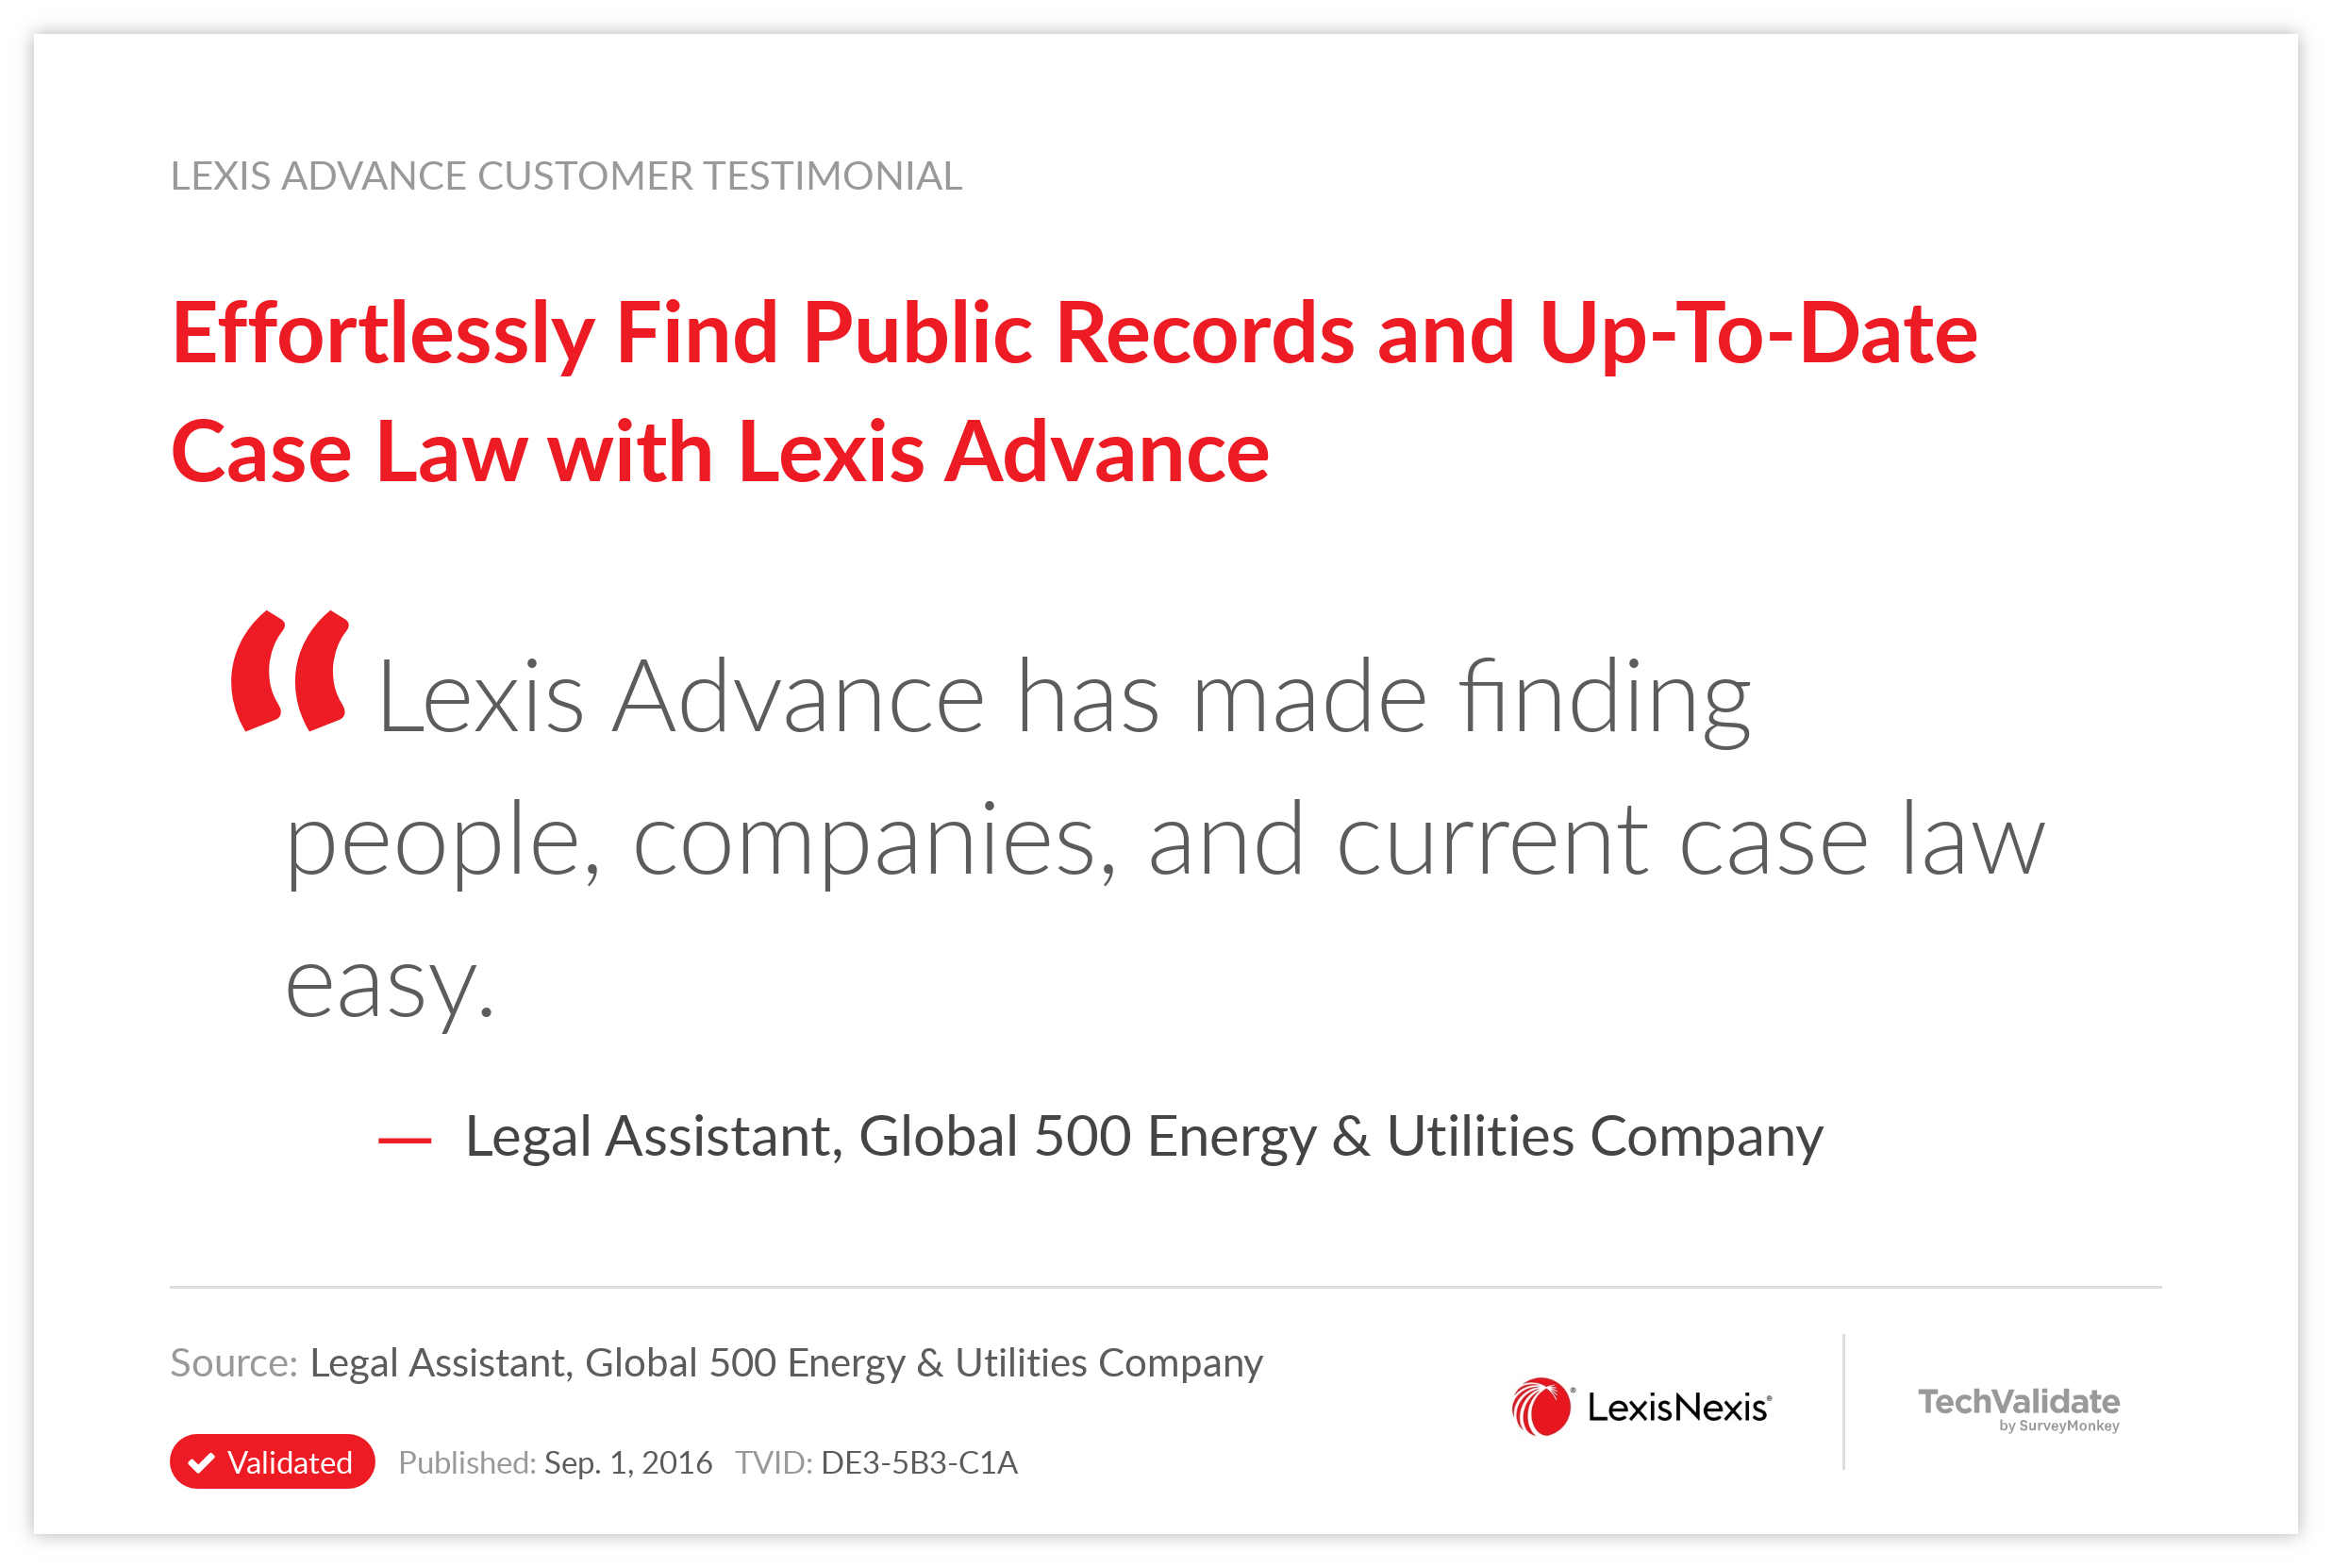 Effortlessly Find Public Records and Up-To-Date Case Law with Lexis Advance